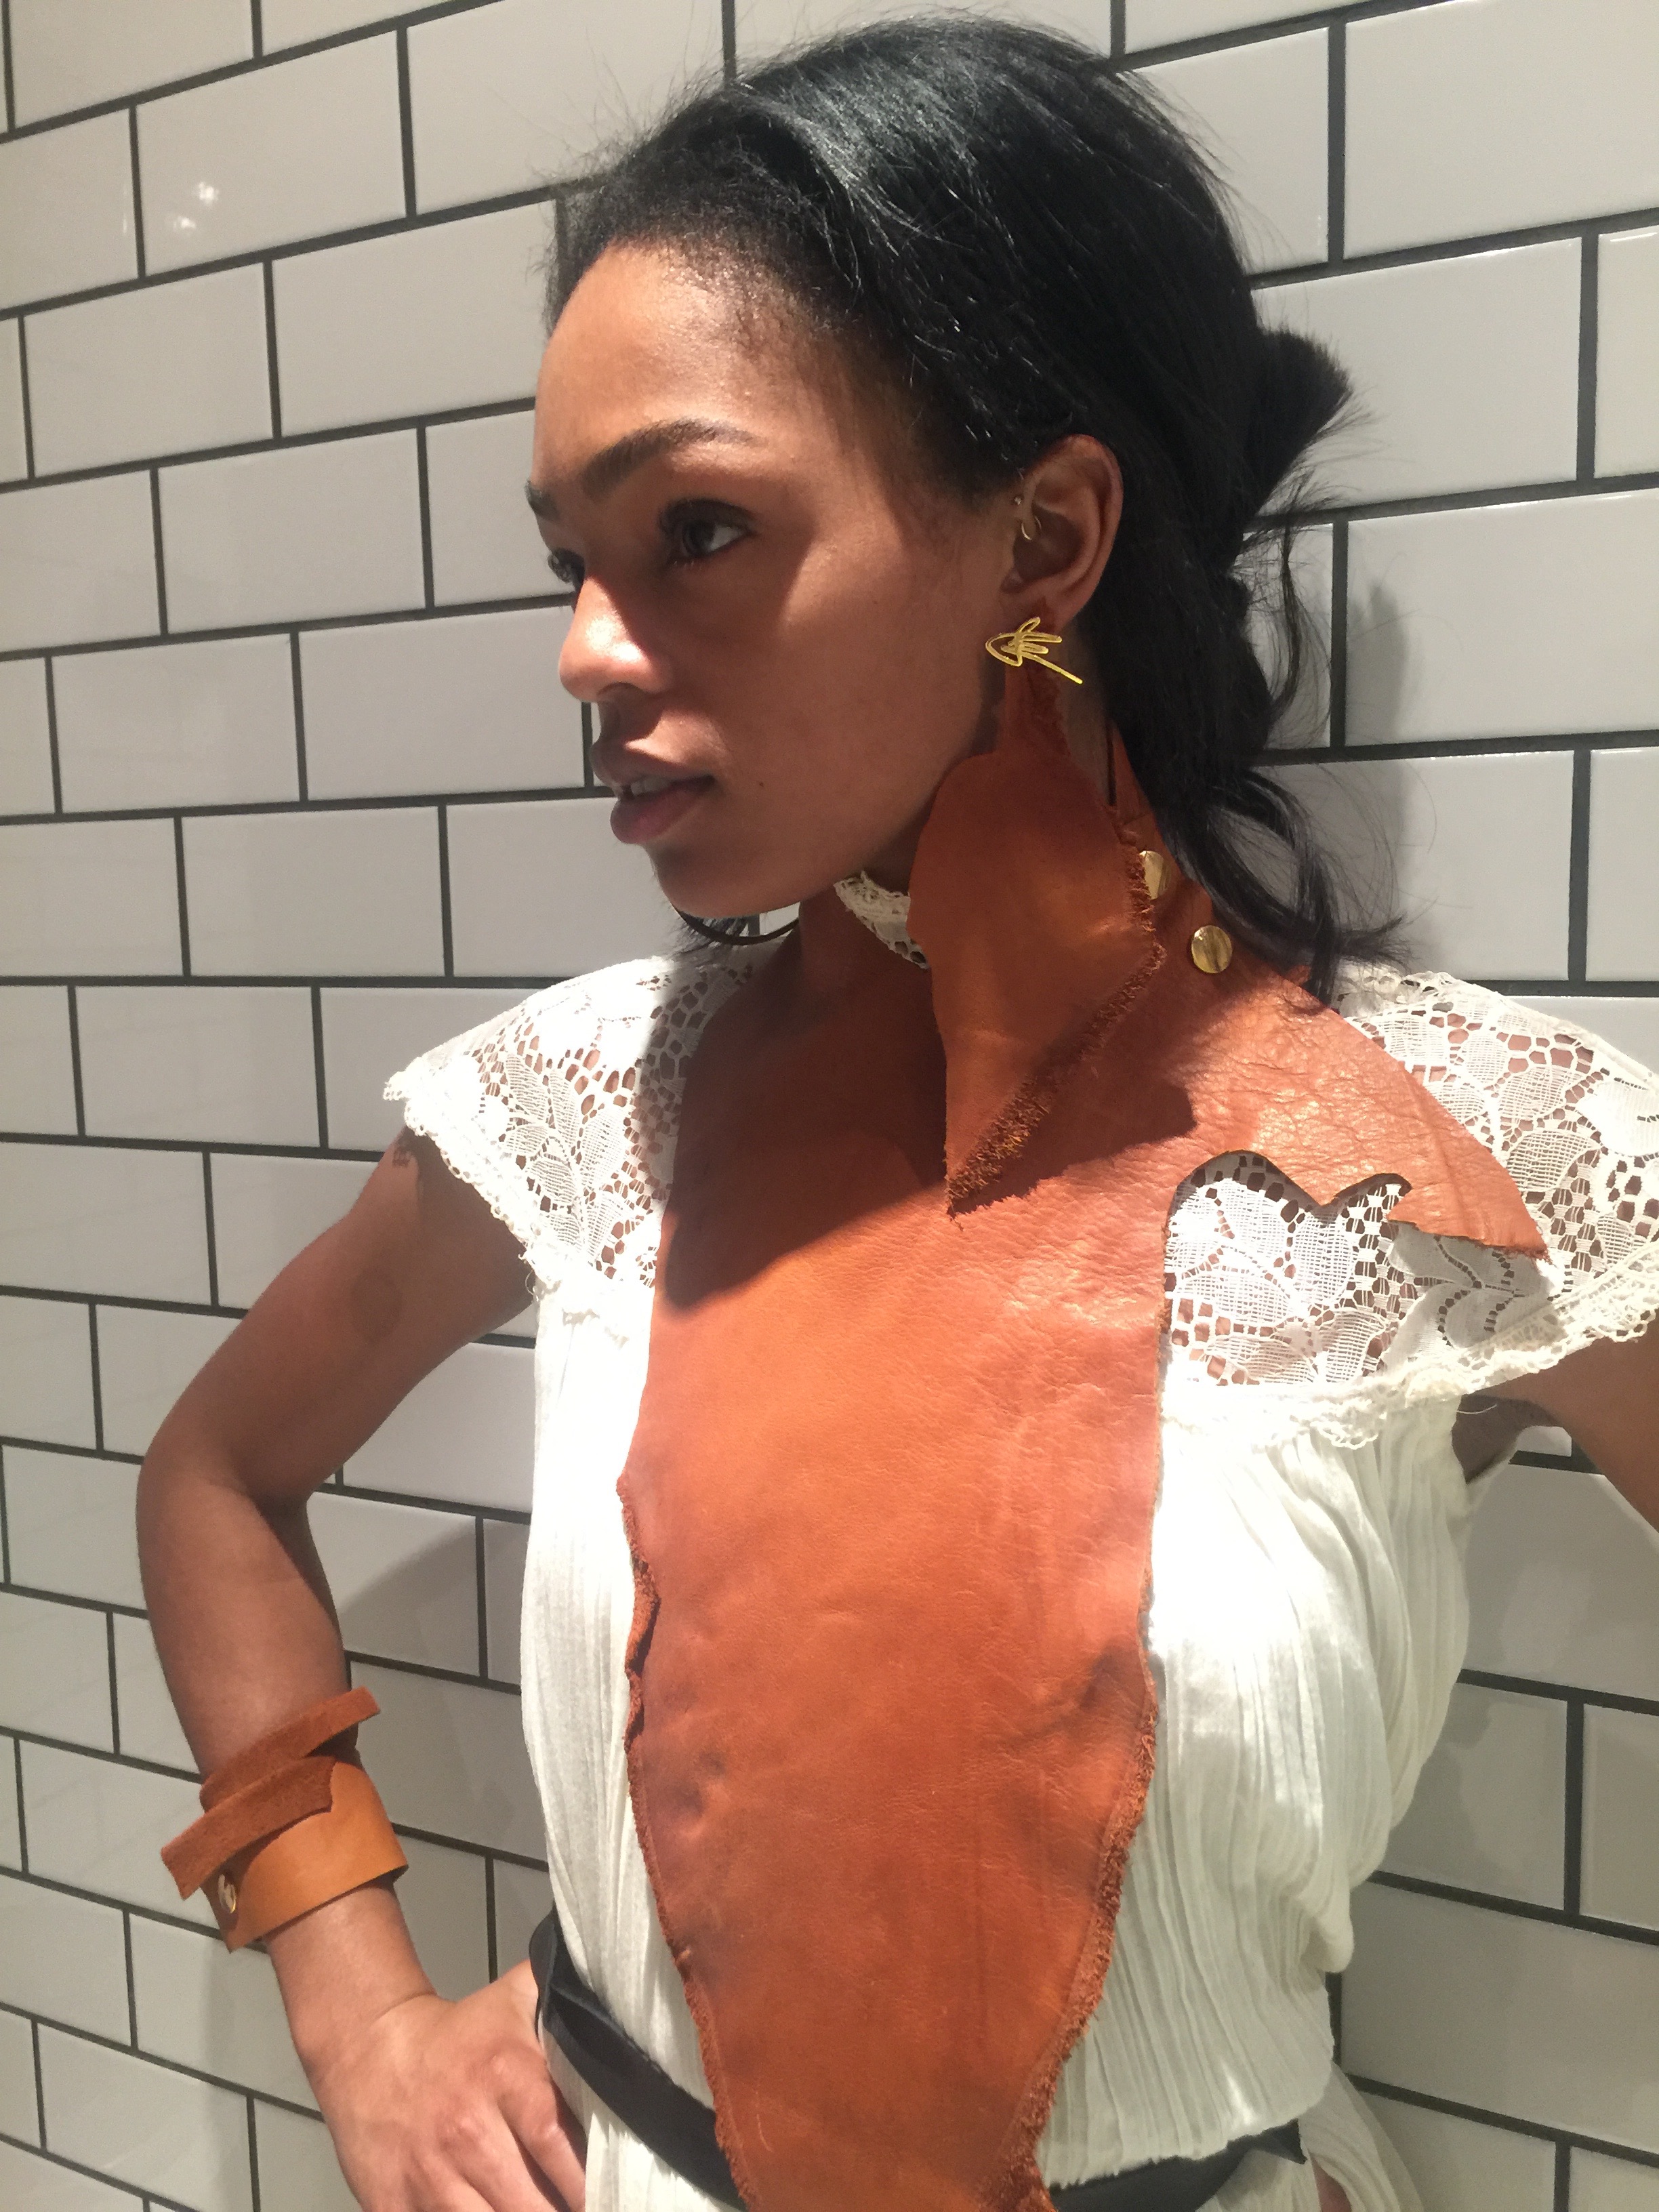 J.Elster The Jagged Fold Cuff in Natural on Selah Marley